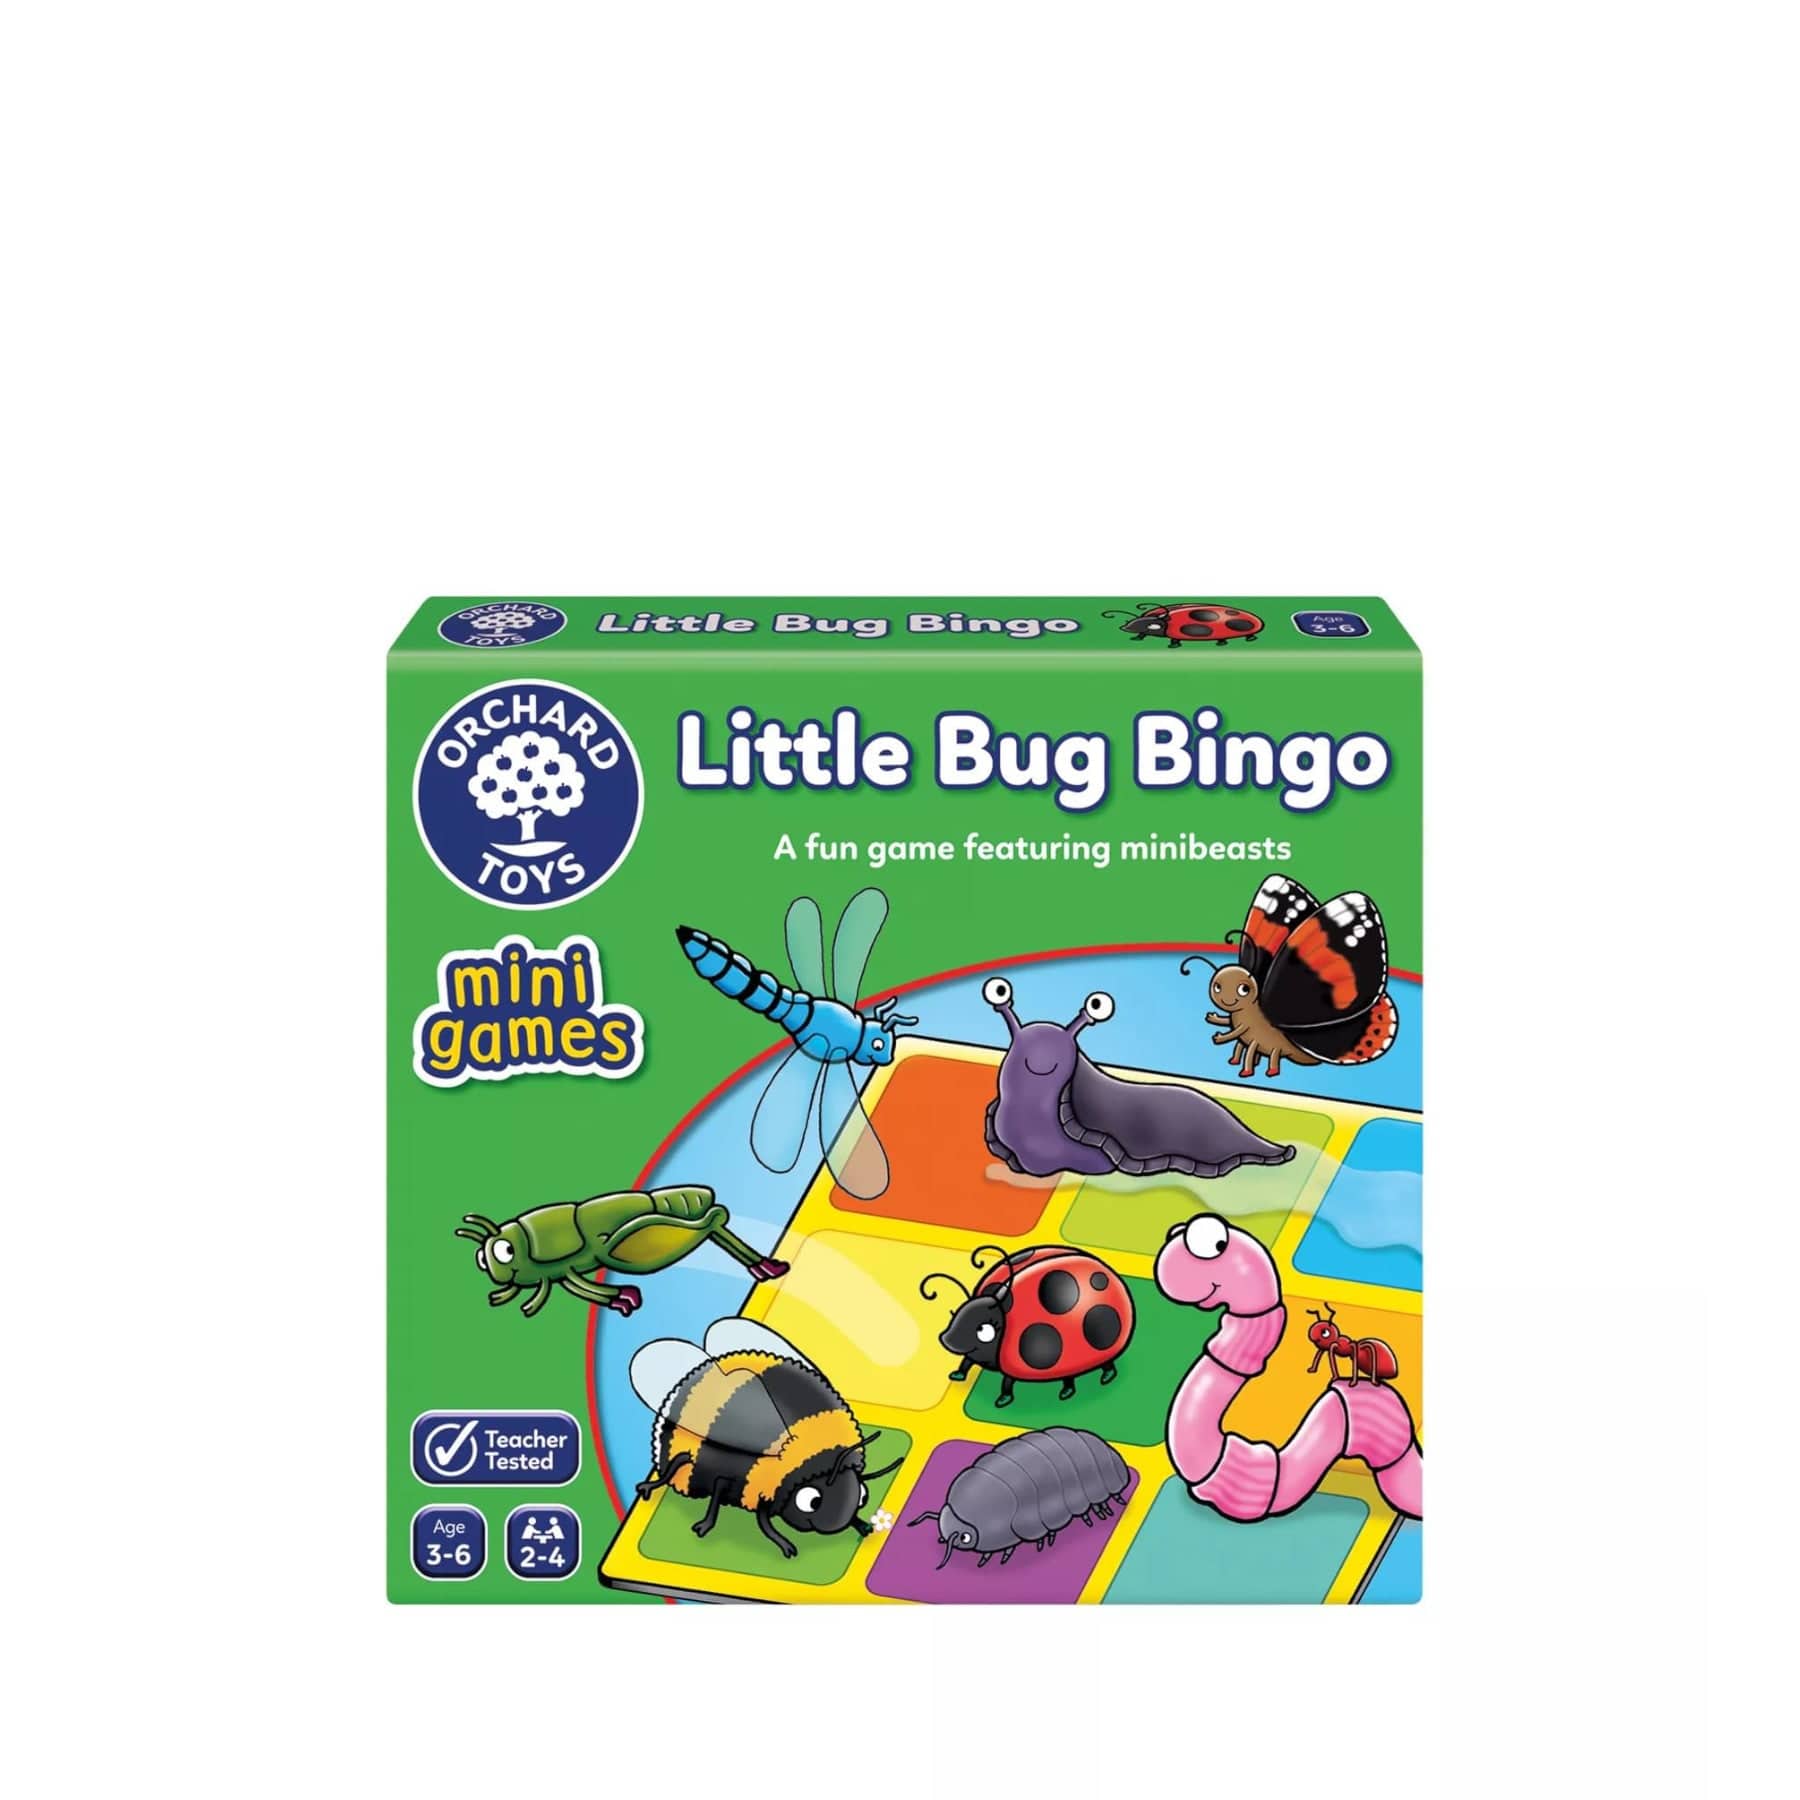 Little Bug Bingo board game by Orchard Toys packaging featuring colorful cartoon insects, educational mini game for children ages 3-6, teacher tested, fun family game with mini beasts design.